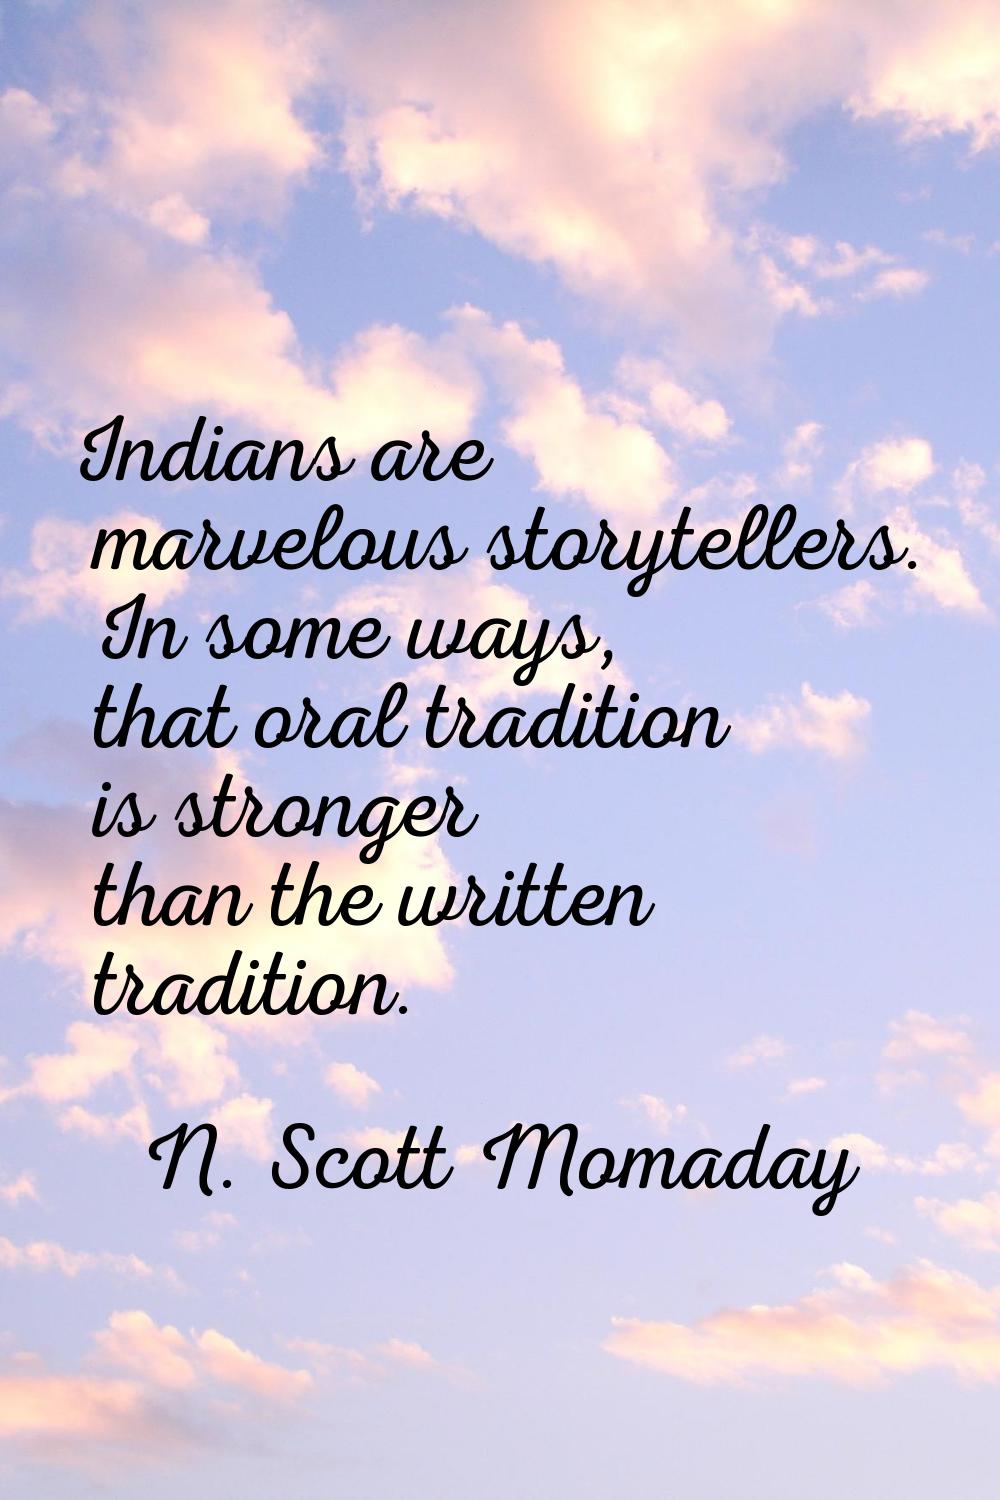 Indians are marvelous storytellers. In some ways, that oral tradition is stronger than the written 